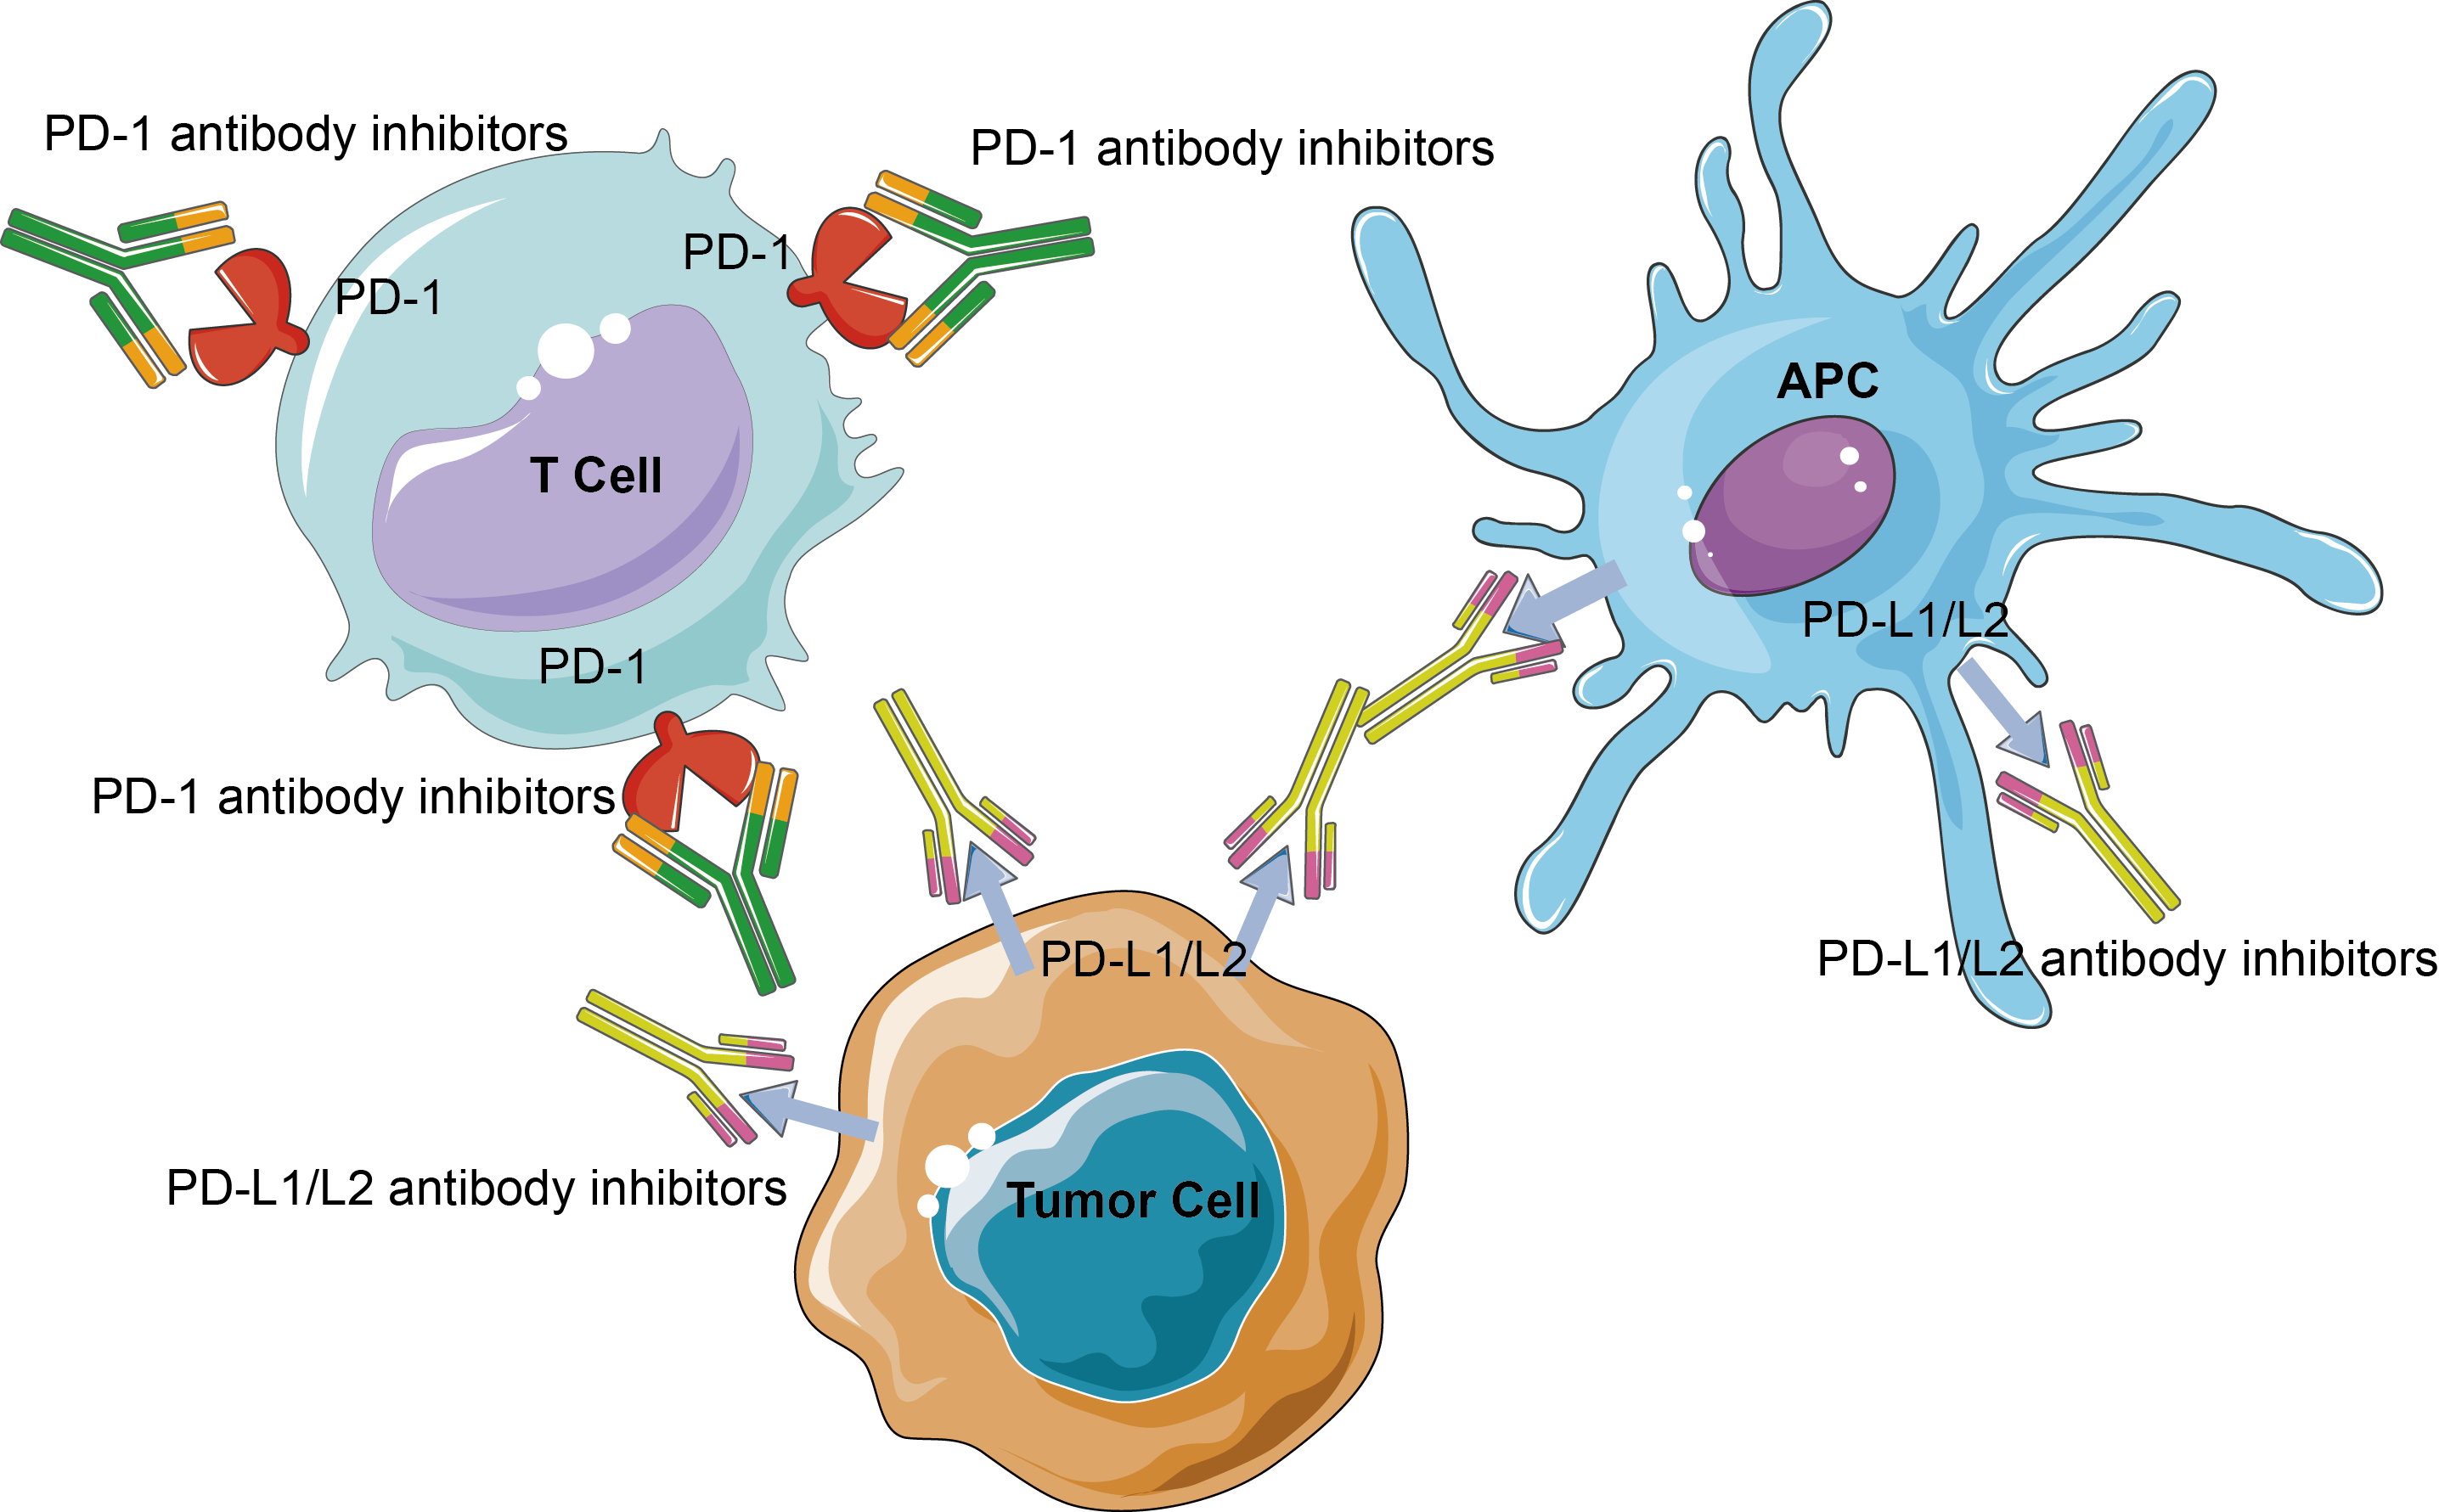 Immune checkpoint proteins creative. Germs clipart antibody